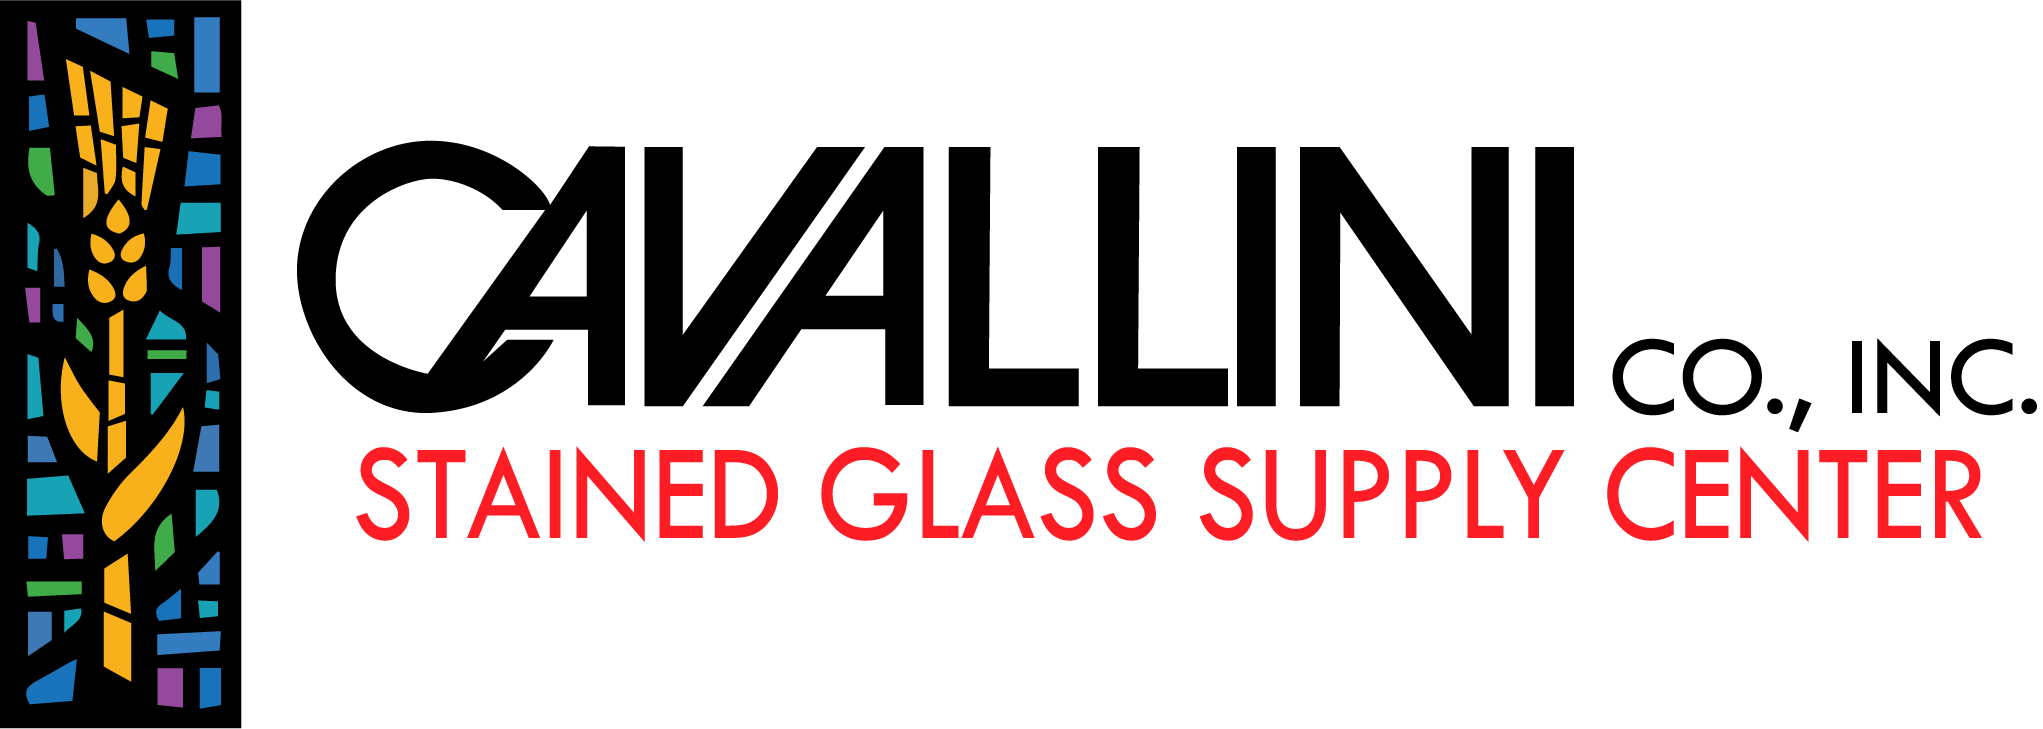 Cavallini Co, Inc. Stained Glass Supply Center